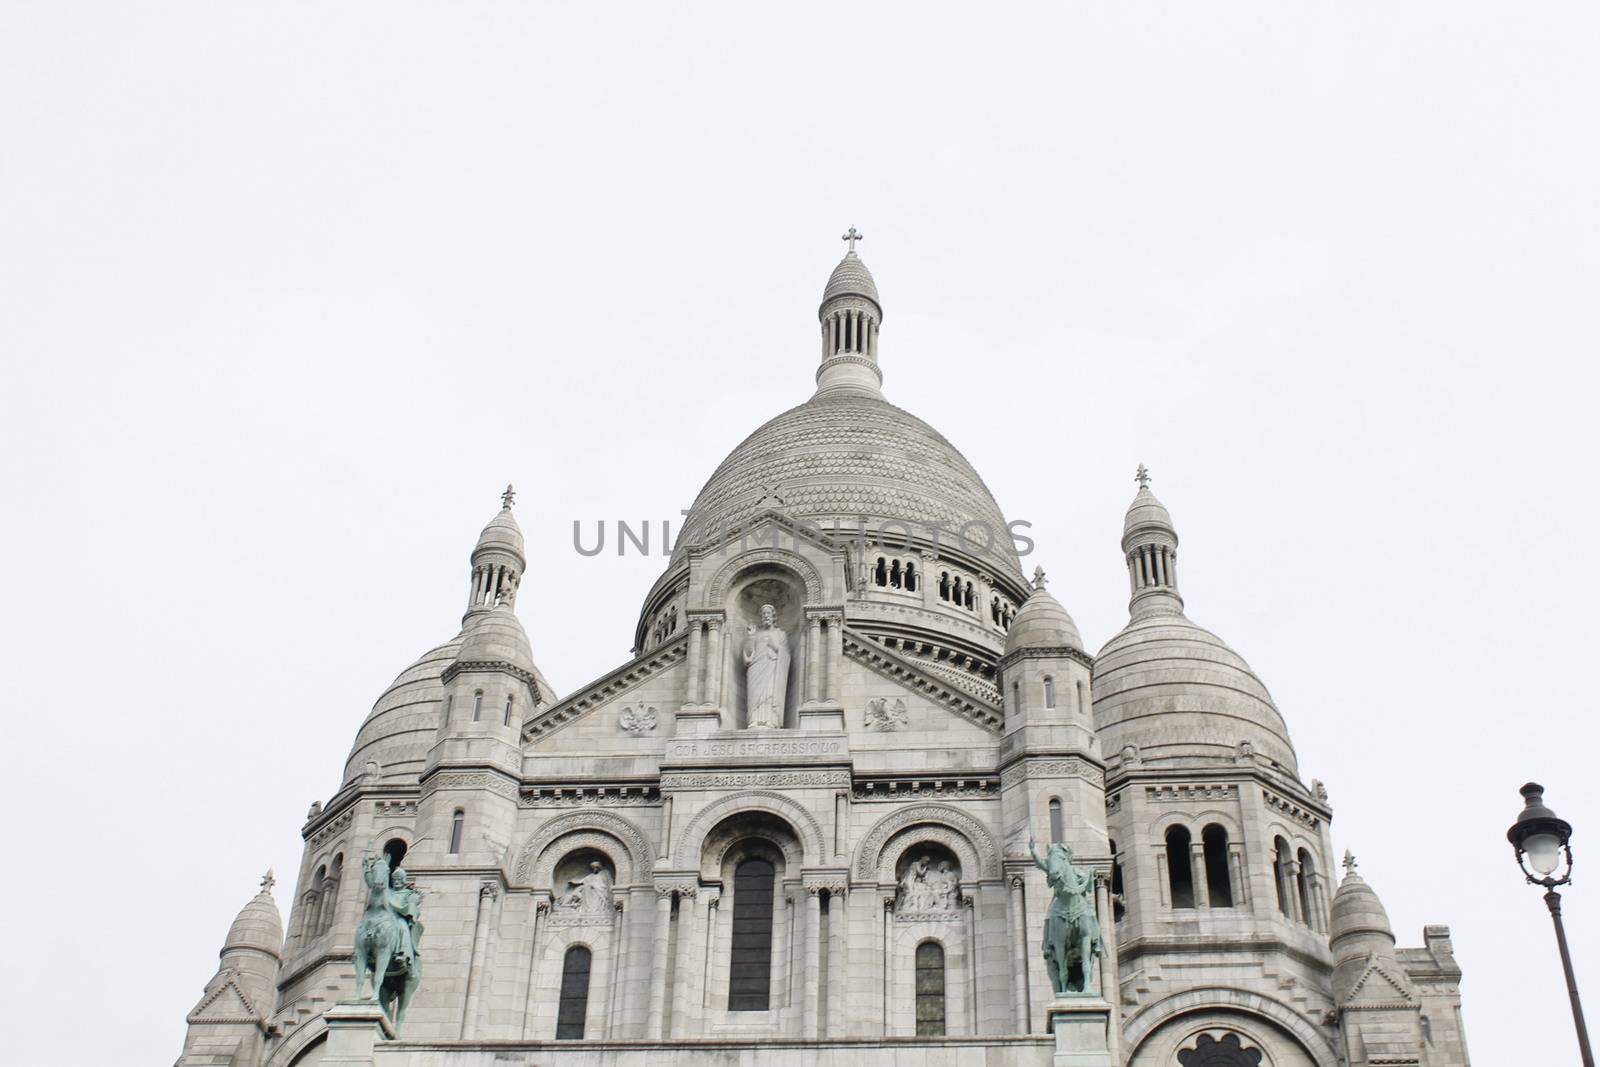 Basilica of the Sacre Coeur by marcobir